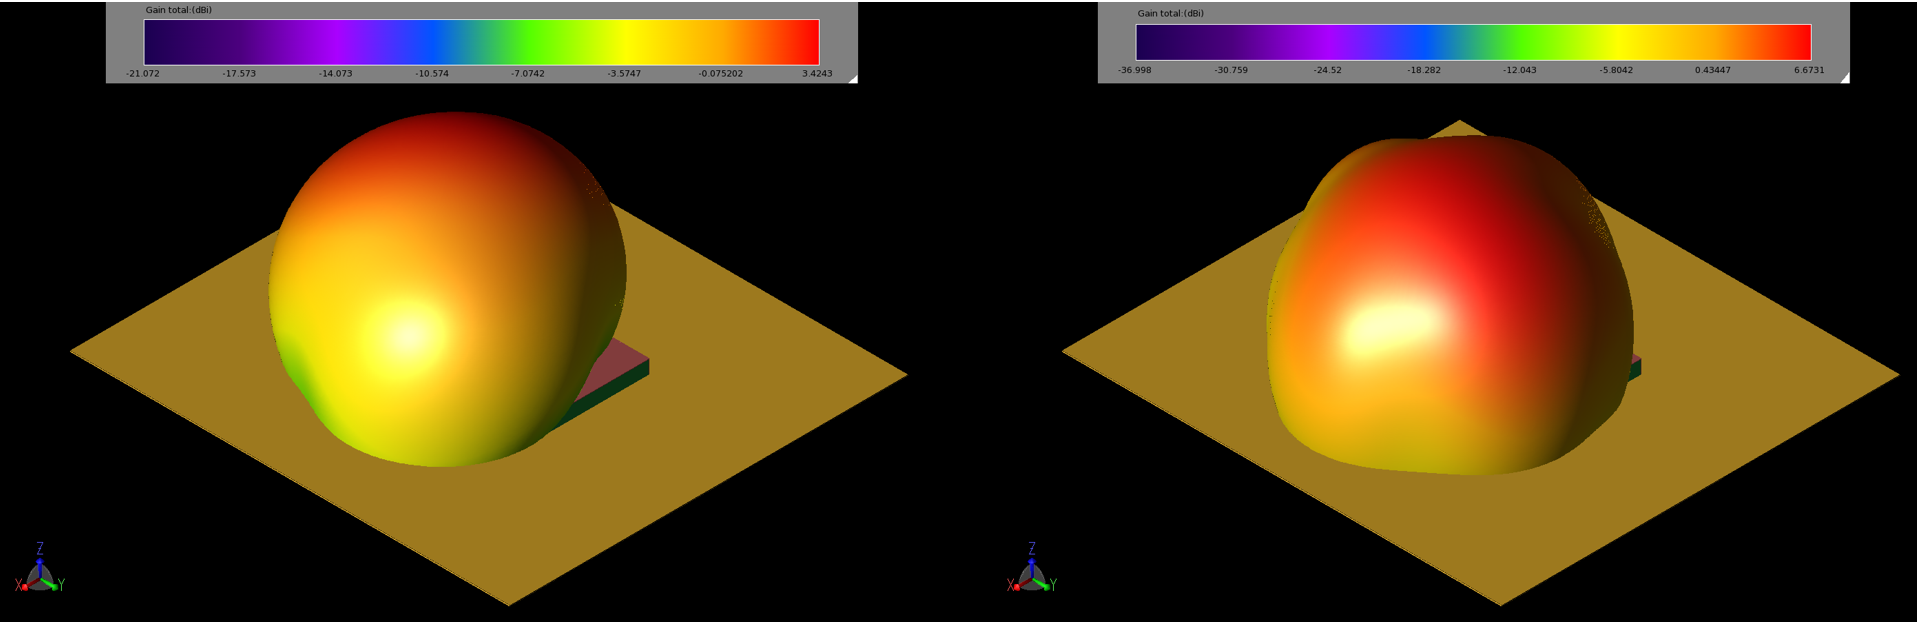 Figure 4: The gain patterns of the patch at 2.45 GHz (left, 4a) and 5.5 GHz (right, 4b) are spherical with peak gain values of 3.4 and 6.7 dBi, respectively.